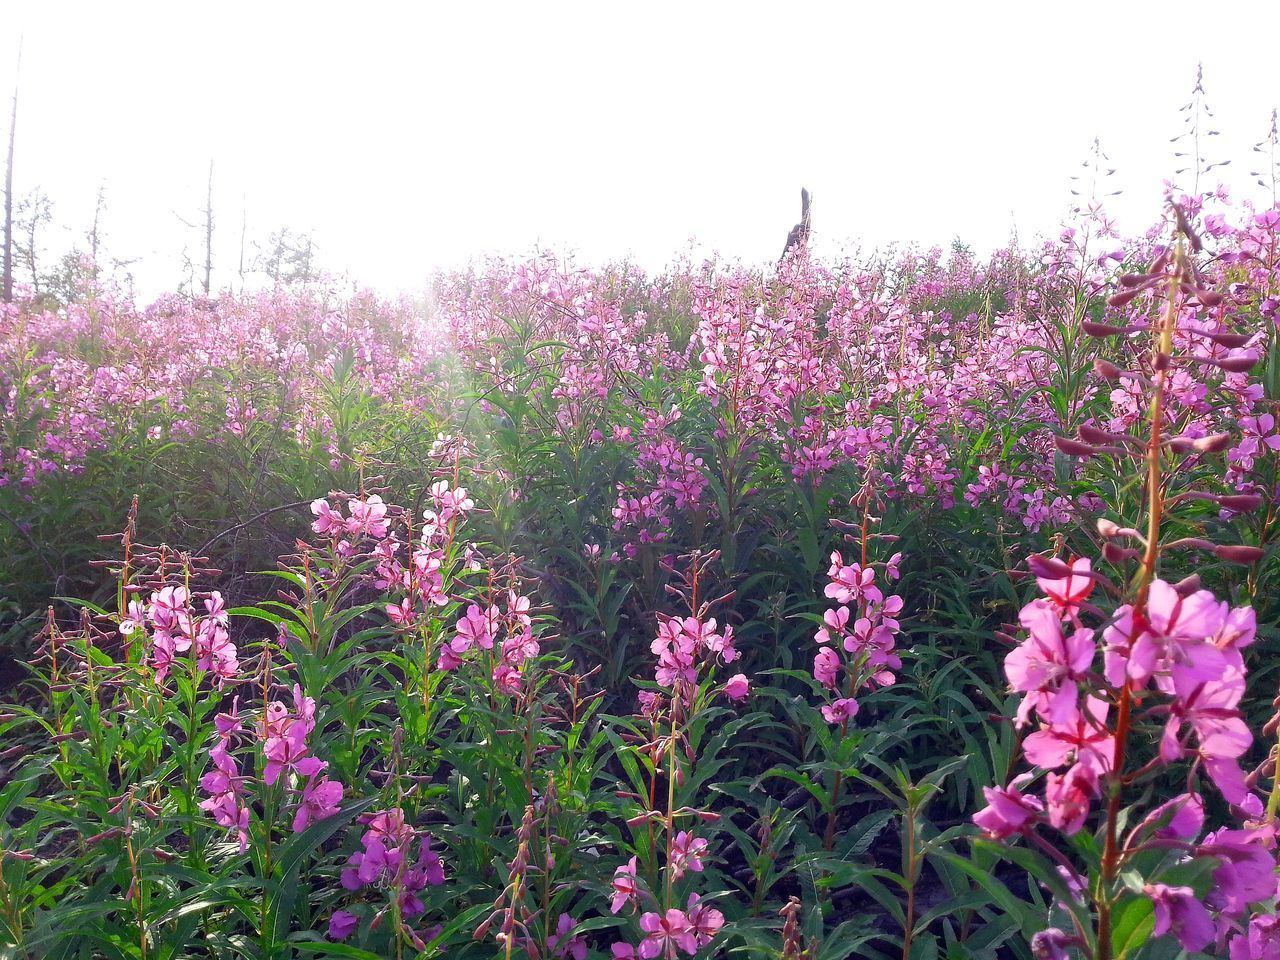 CLOSE-UP OF PINK FLOWERING PLANTS ON LAND